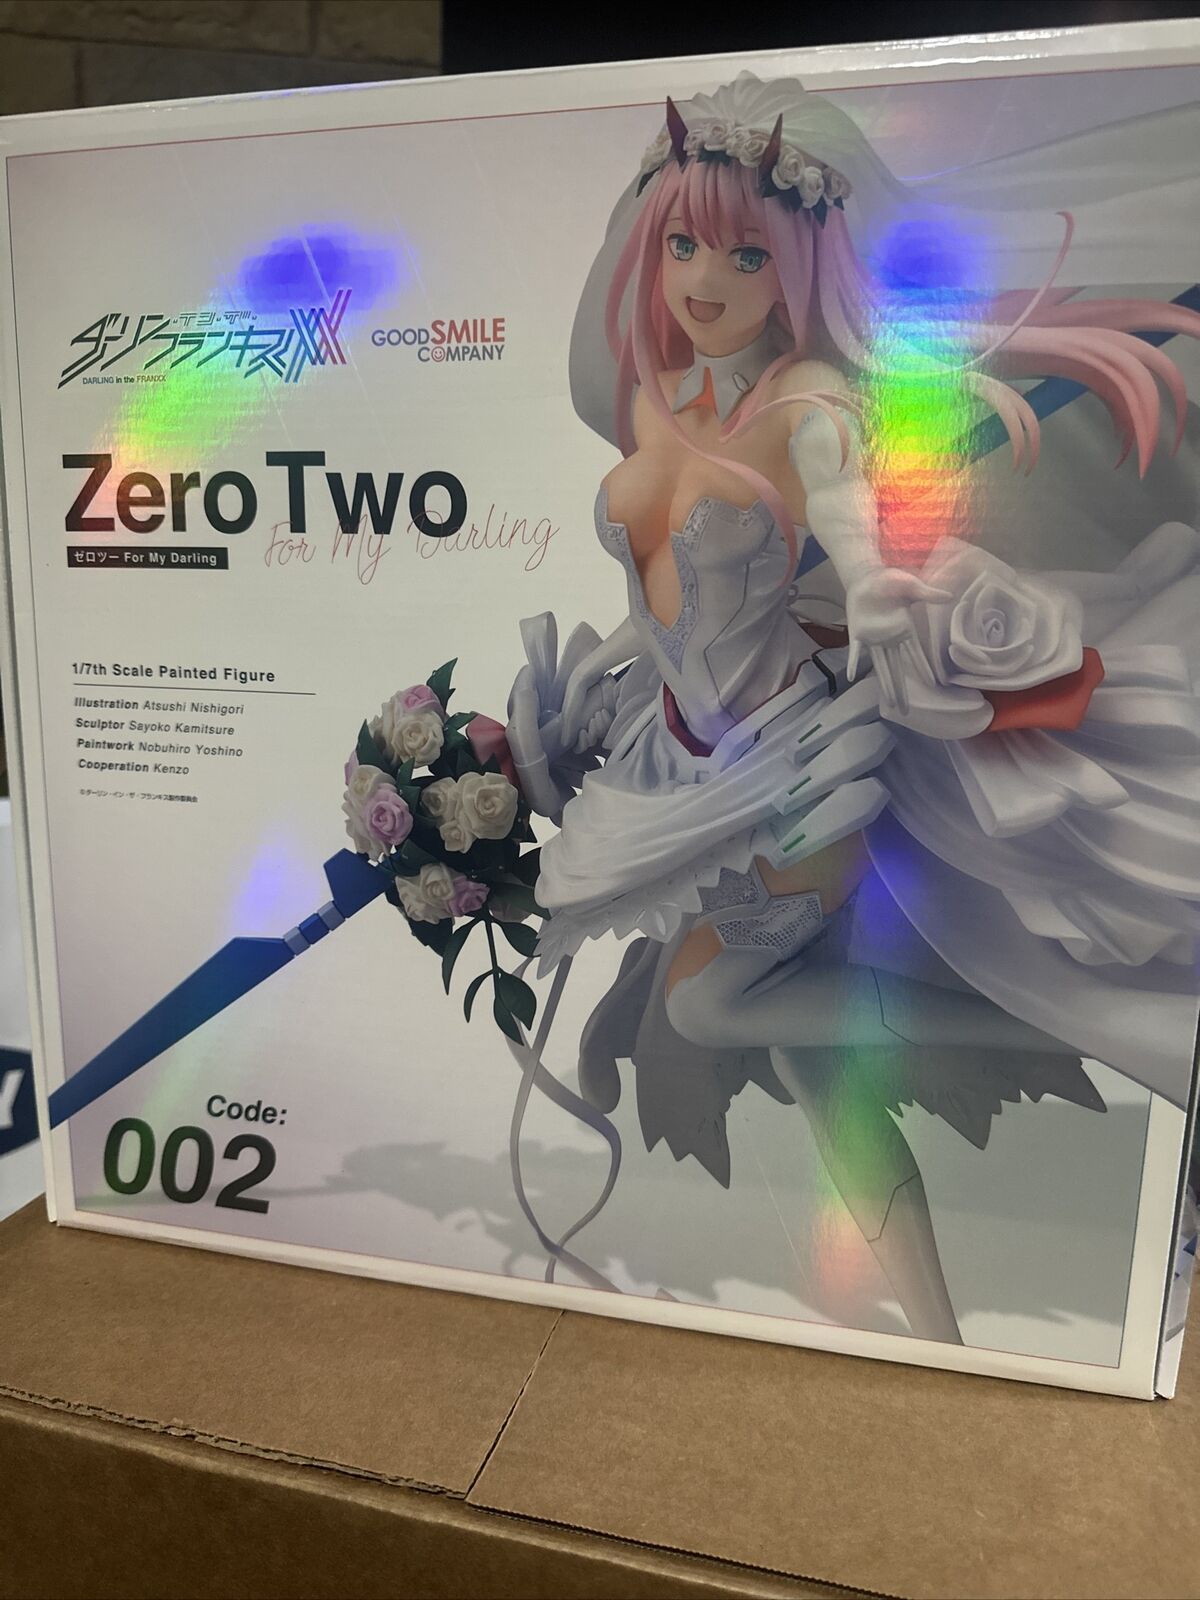 DARLING in the FRANXX Zero Two For My Darling 1/7 Figure GOOD SMILE COMPANY